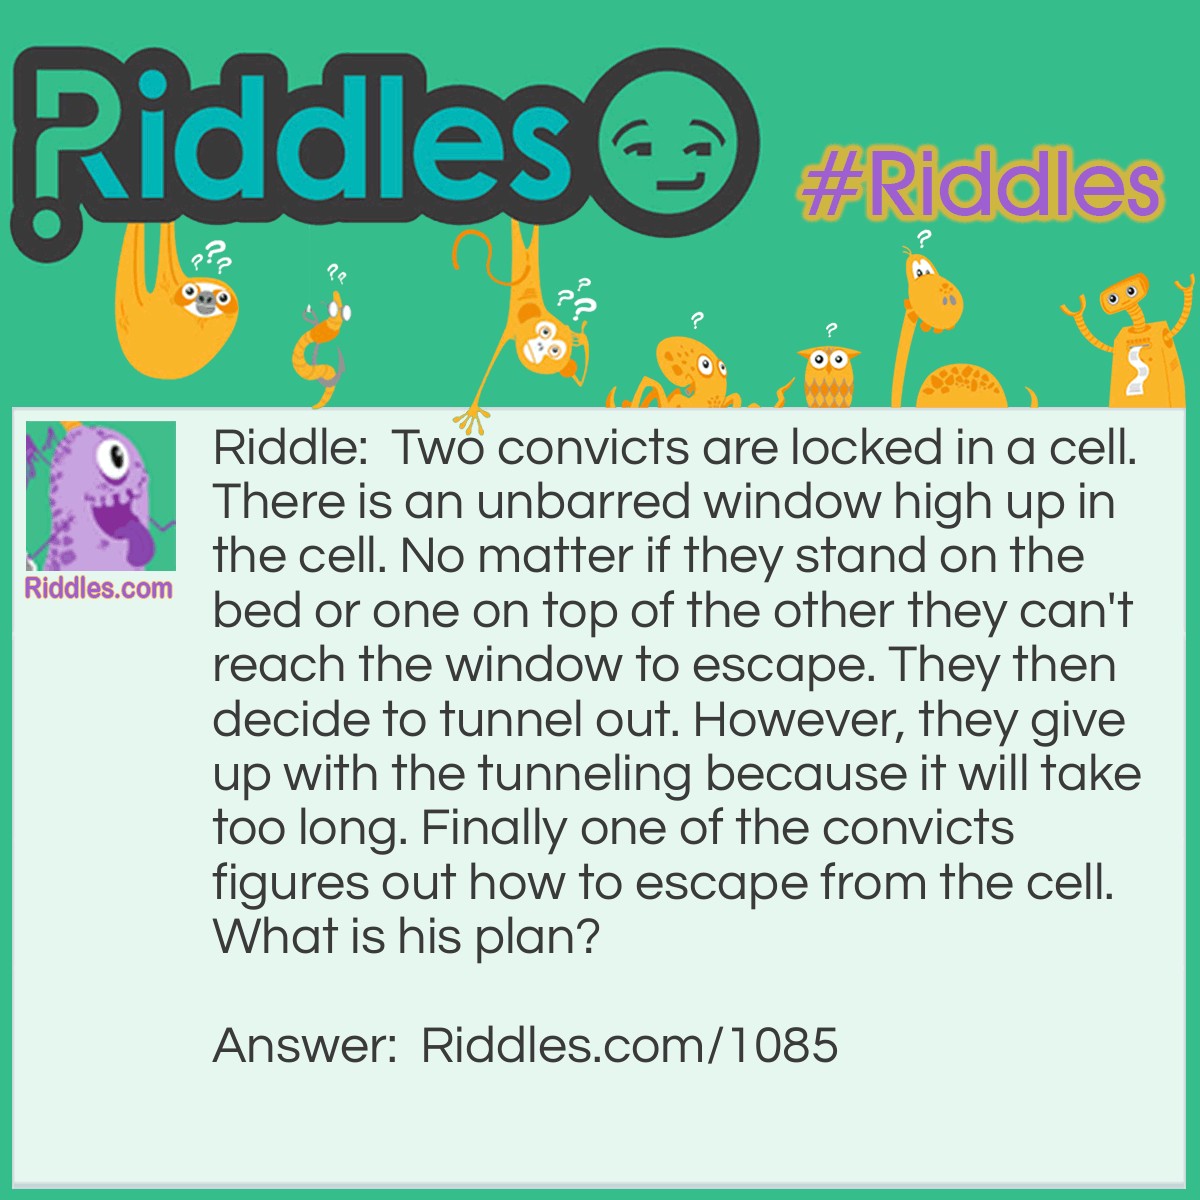 Riddle: Two convicts are locked in a cell. There is an unbarred window high up in the cell. No matter if they stand on the bed or one on top of the other they can't reach the window to escape. They then decide to tunnel out. However, they give up with the tunneling because it will take too long. Finally one of the convicts figures out how to escape from the cell.
What is his plan? Answer: His plan is to dig the tunnel and pile up the dirt to climb up to the window to escape.